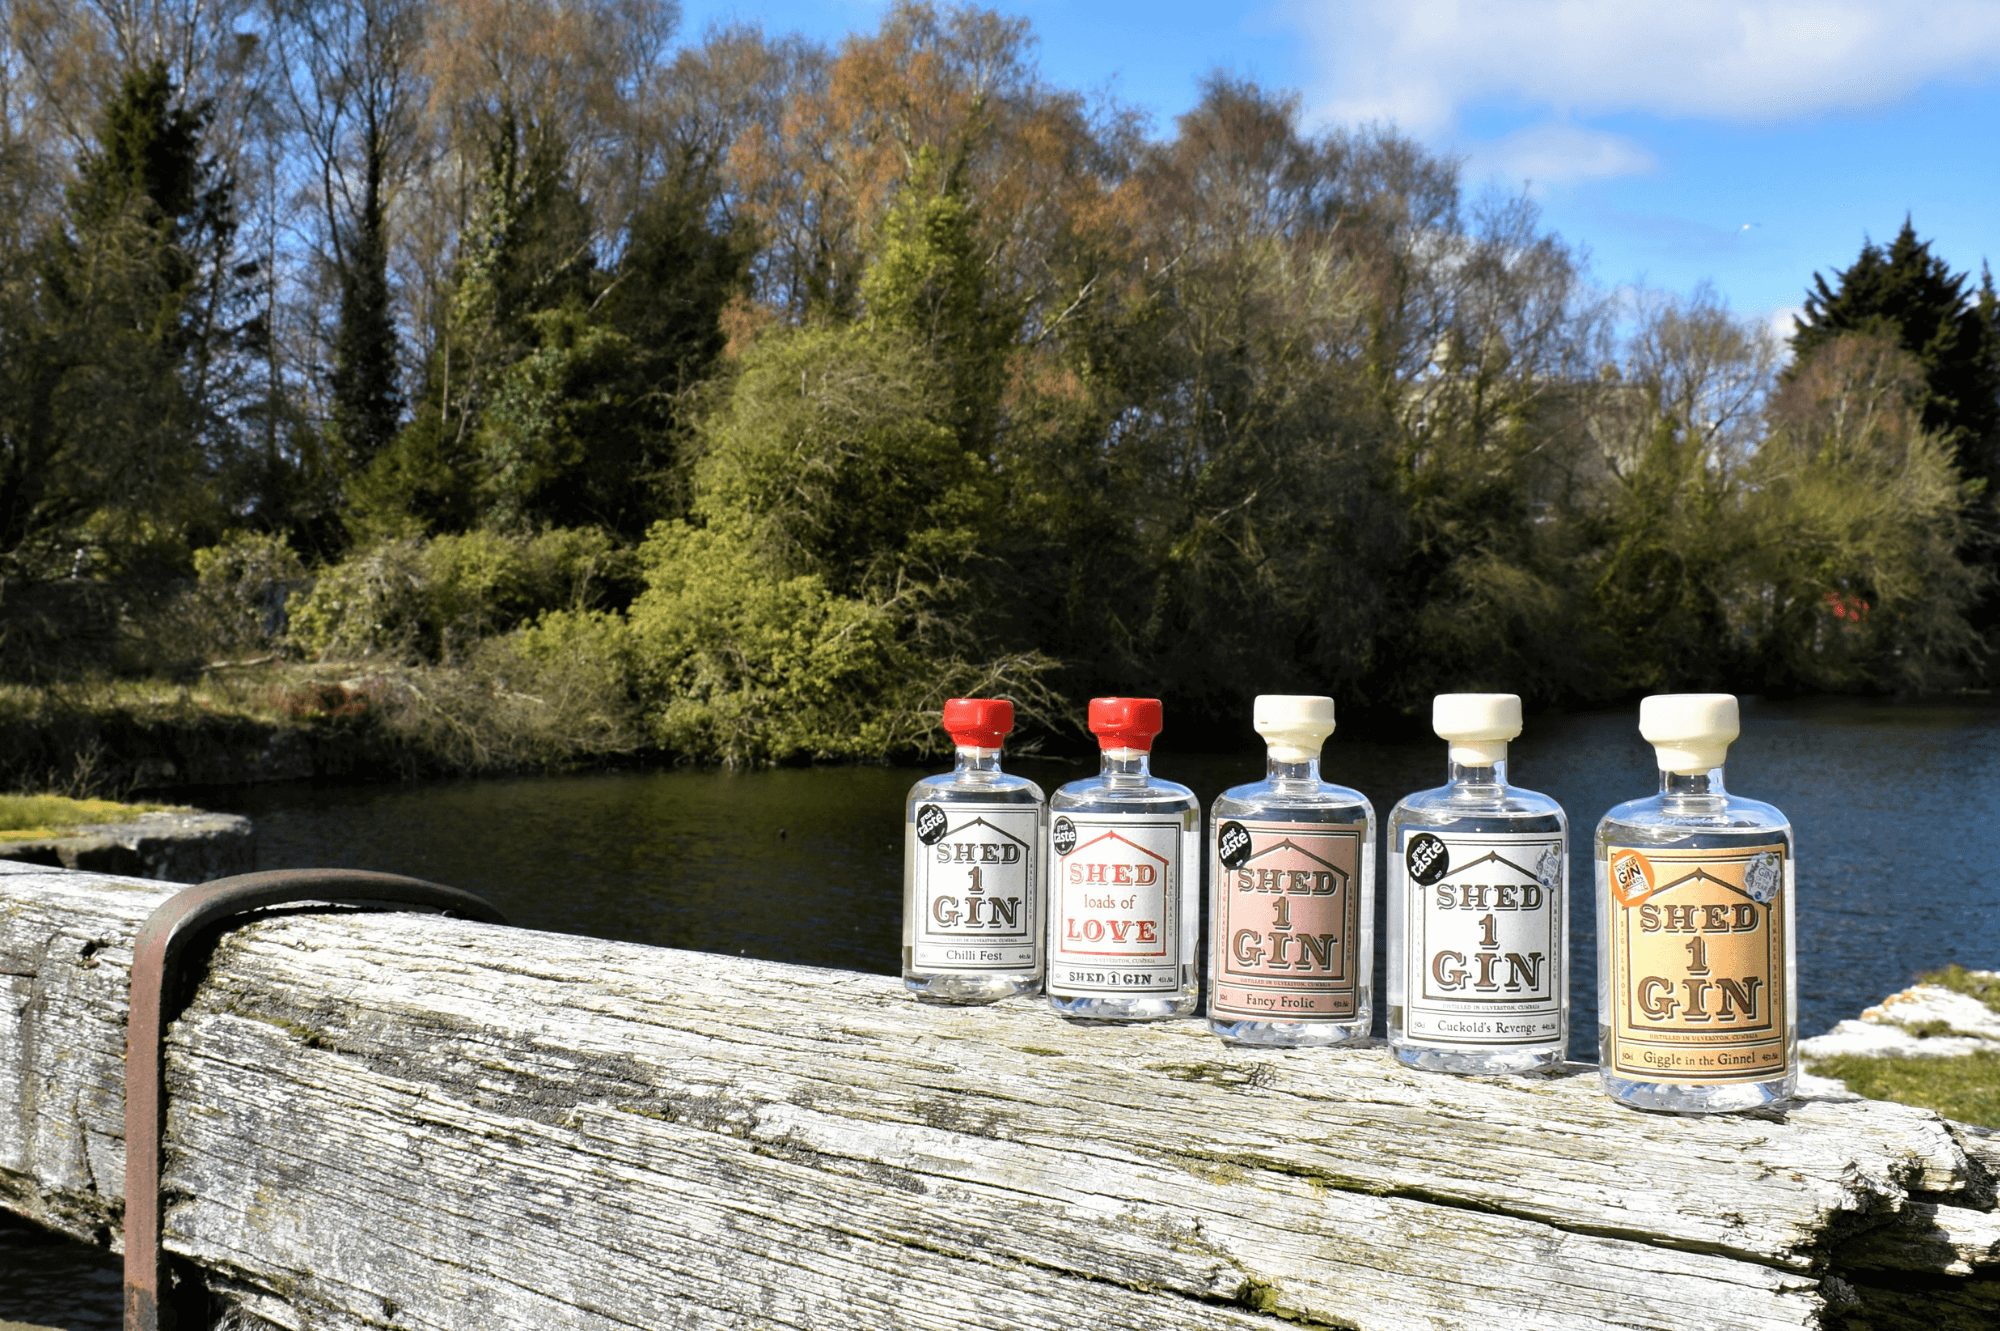 Gin bottles near Ulverston Canal | Shed 1 Distillery, Ulverston on the Edge of the Lake District